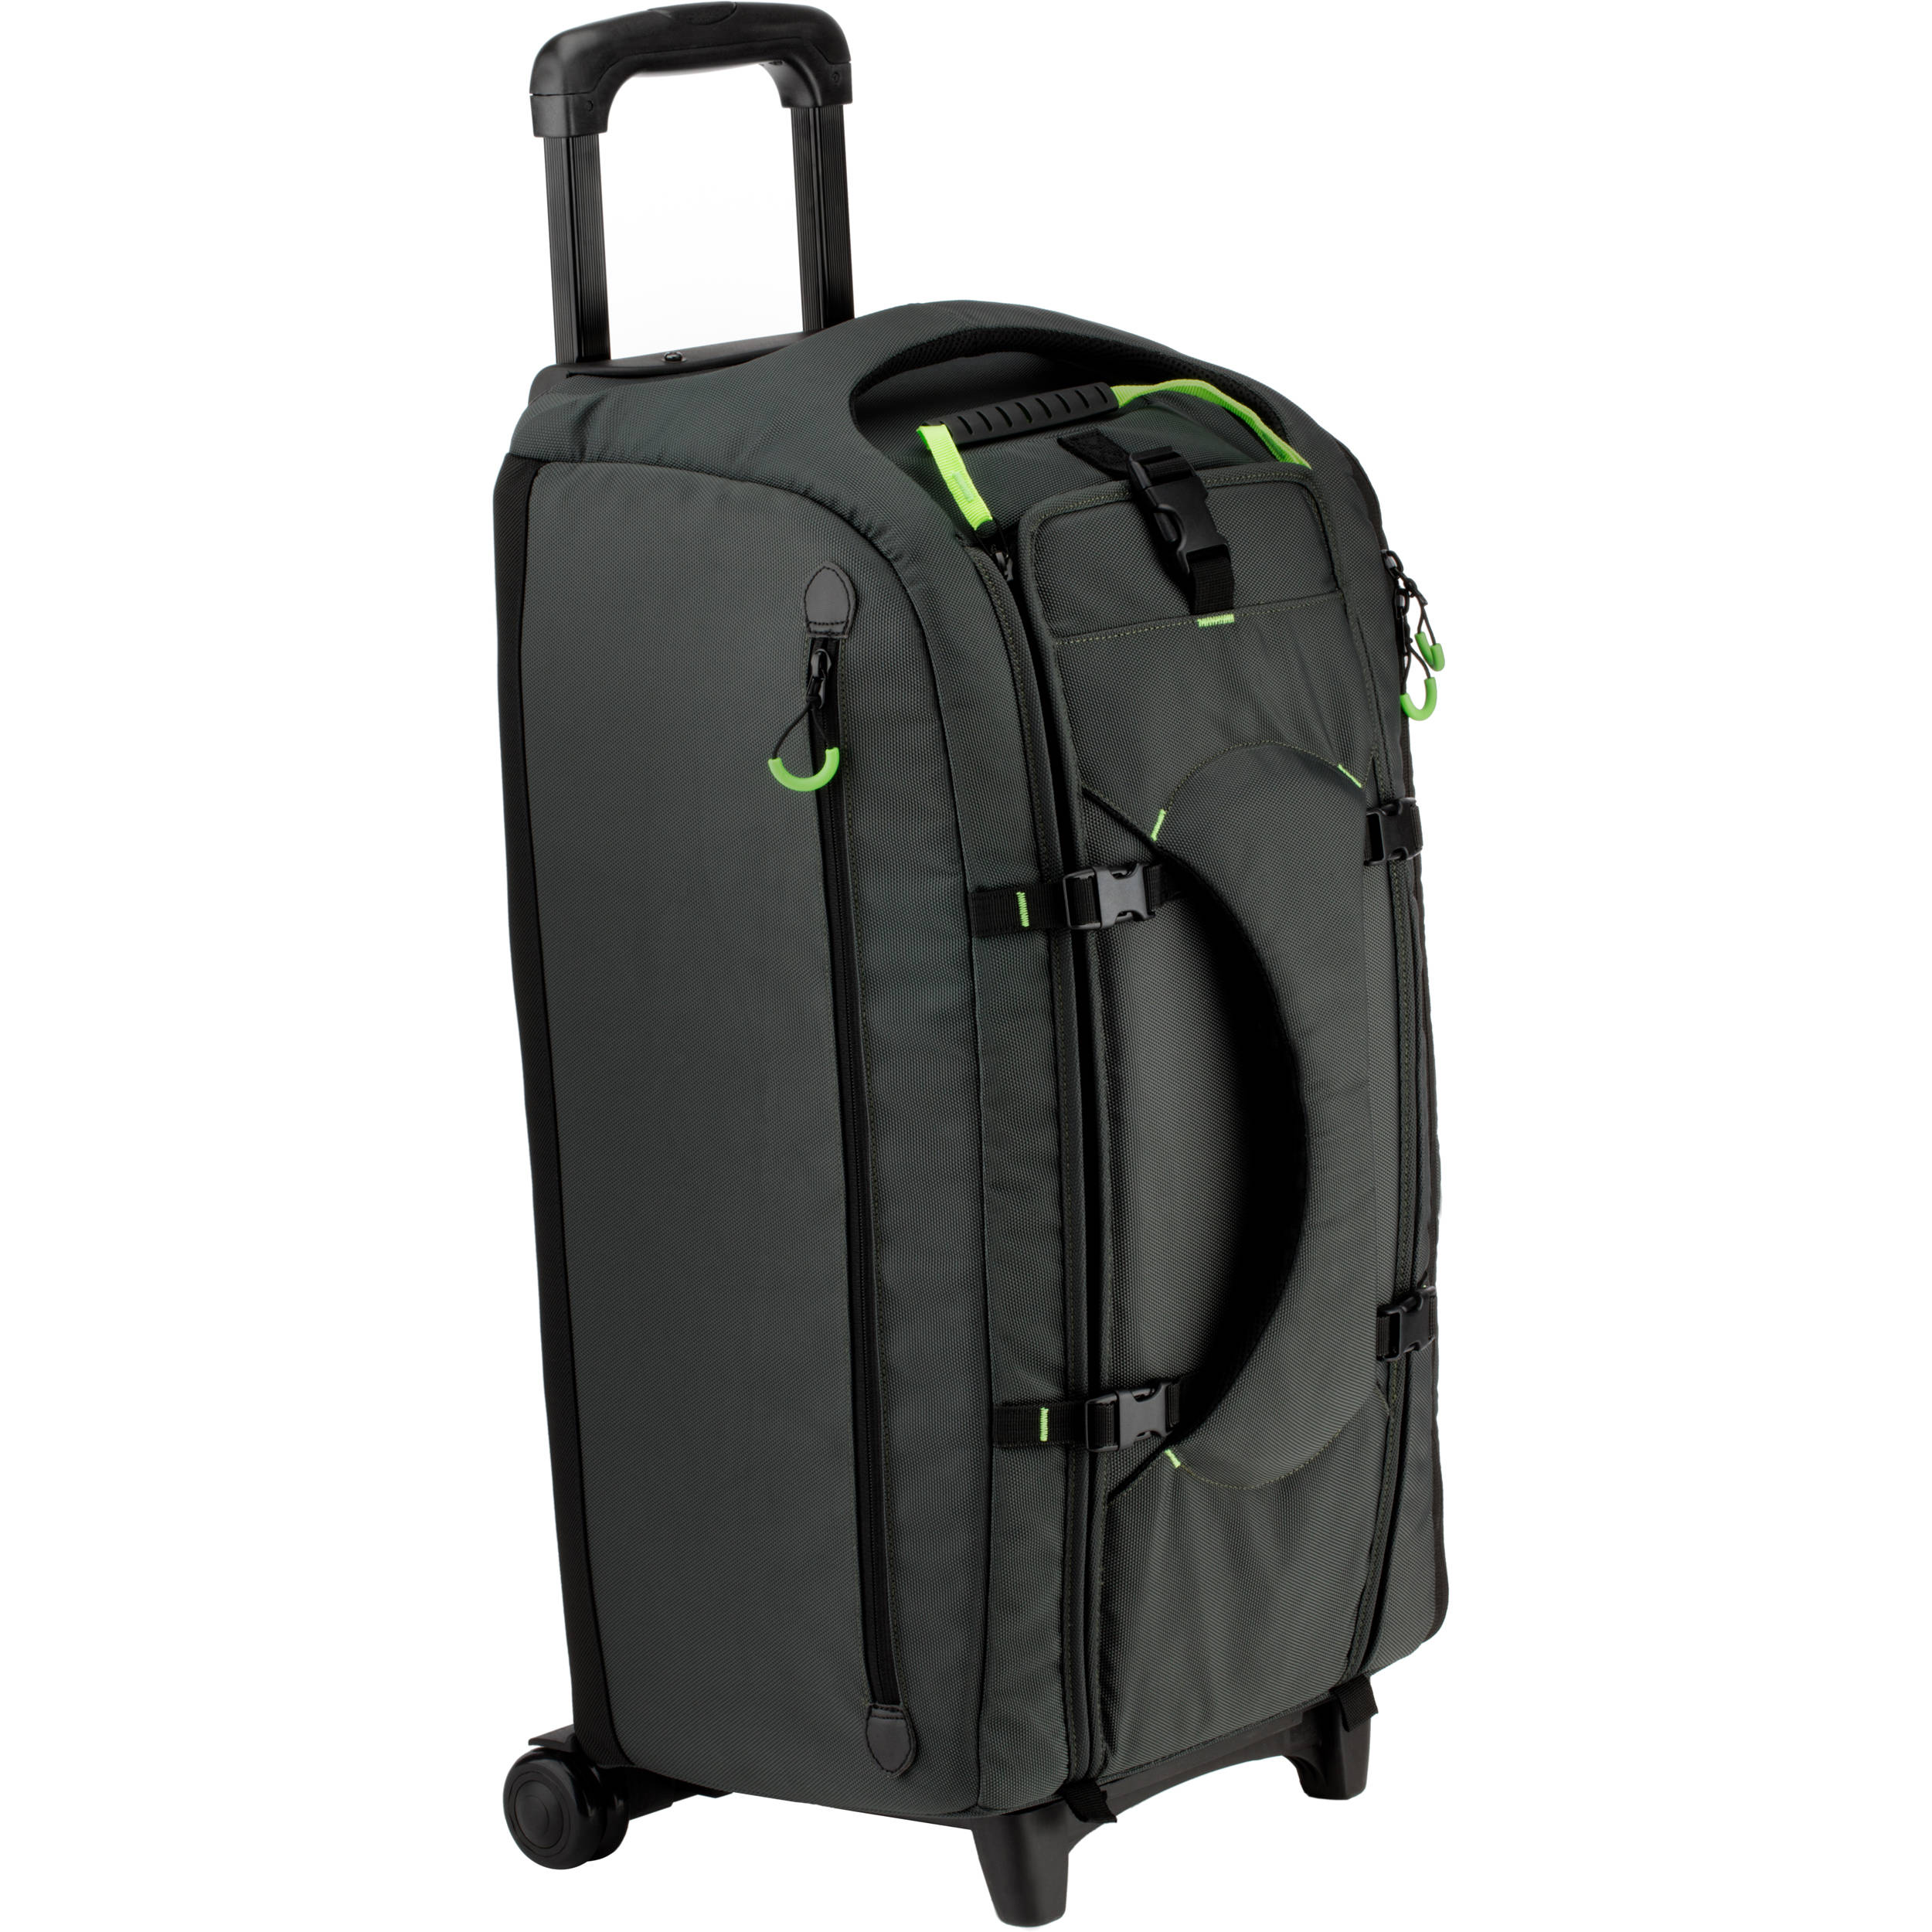 roller case luggage